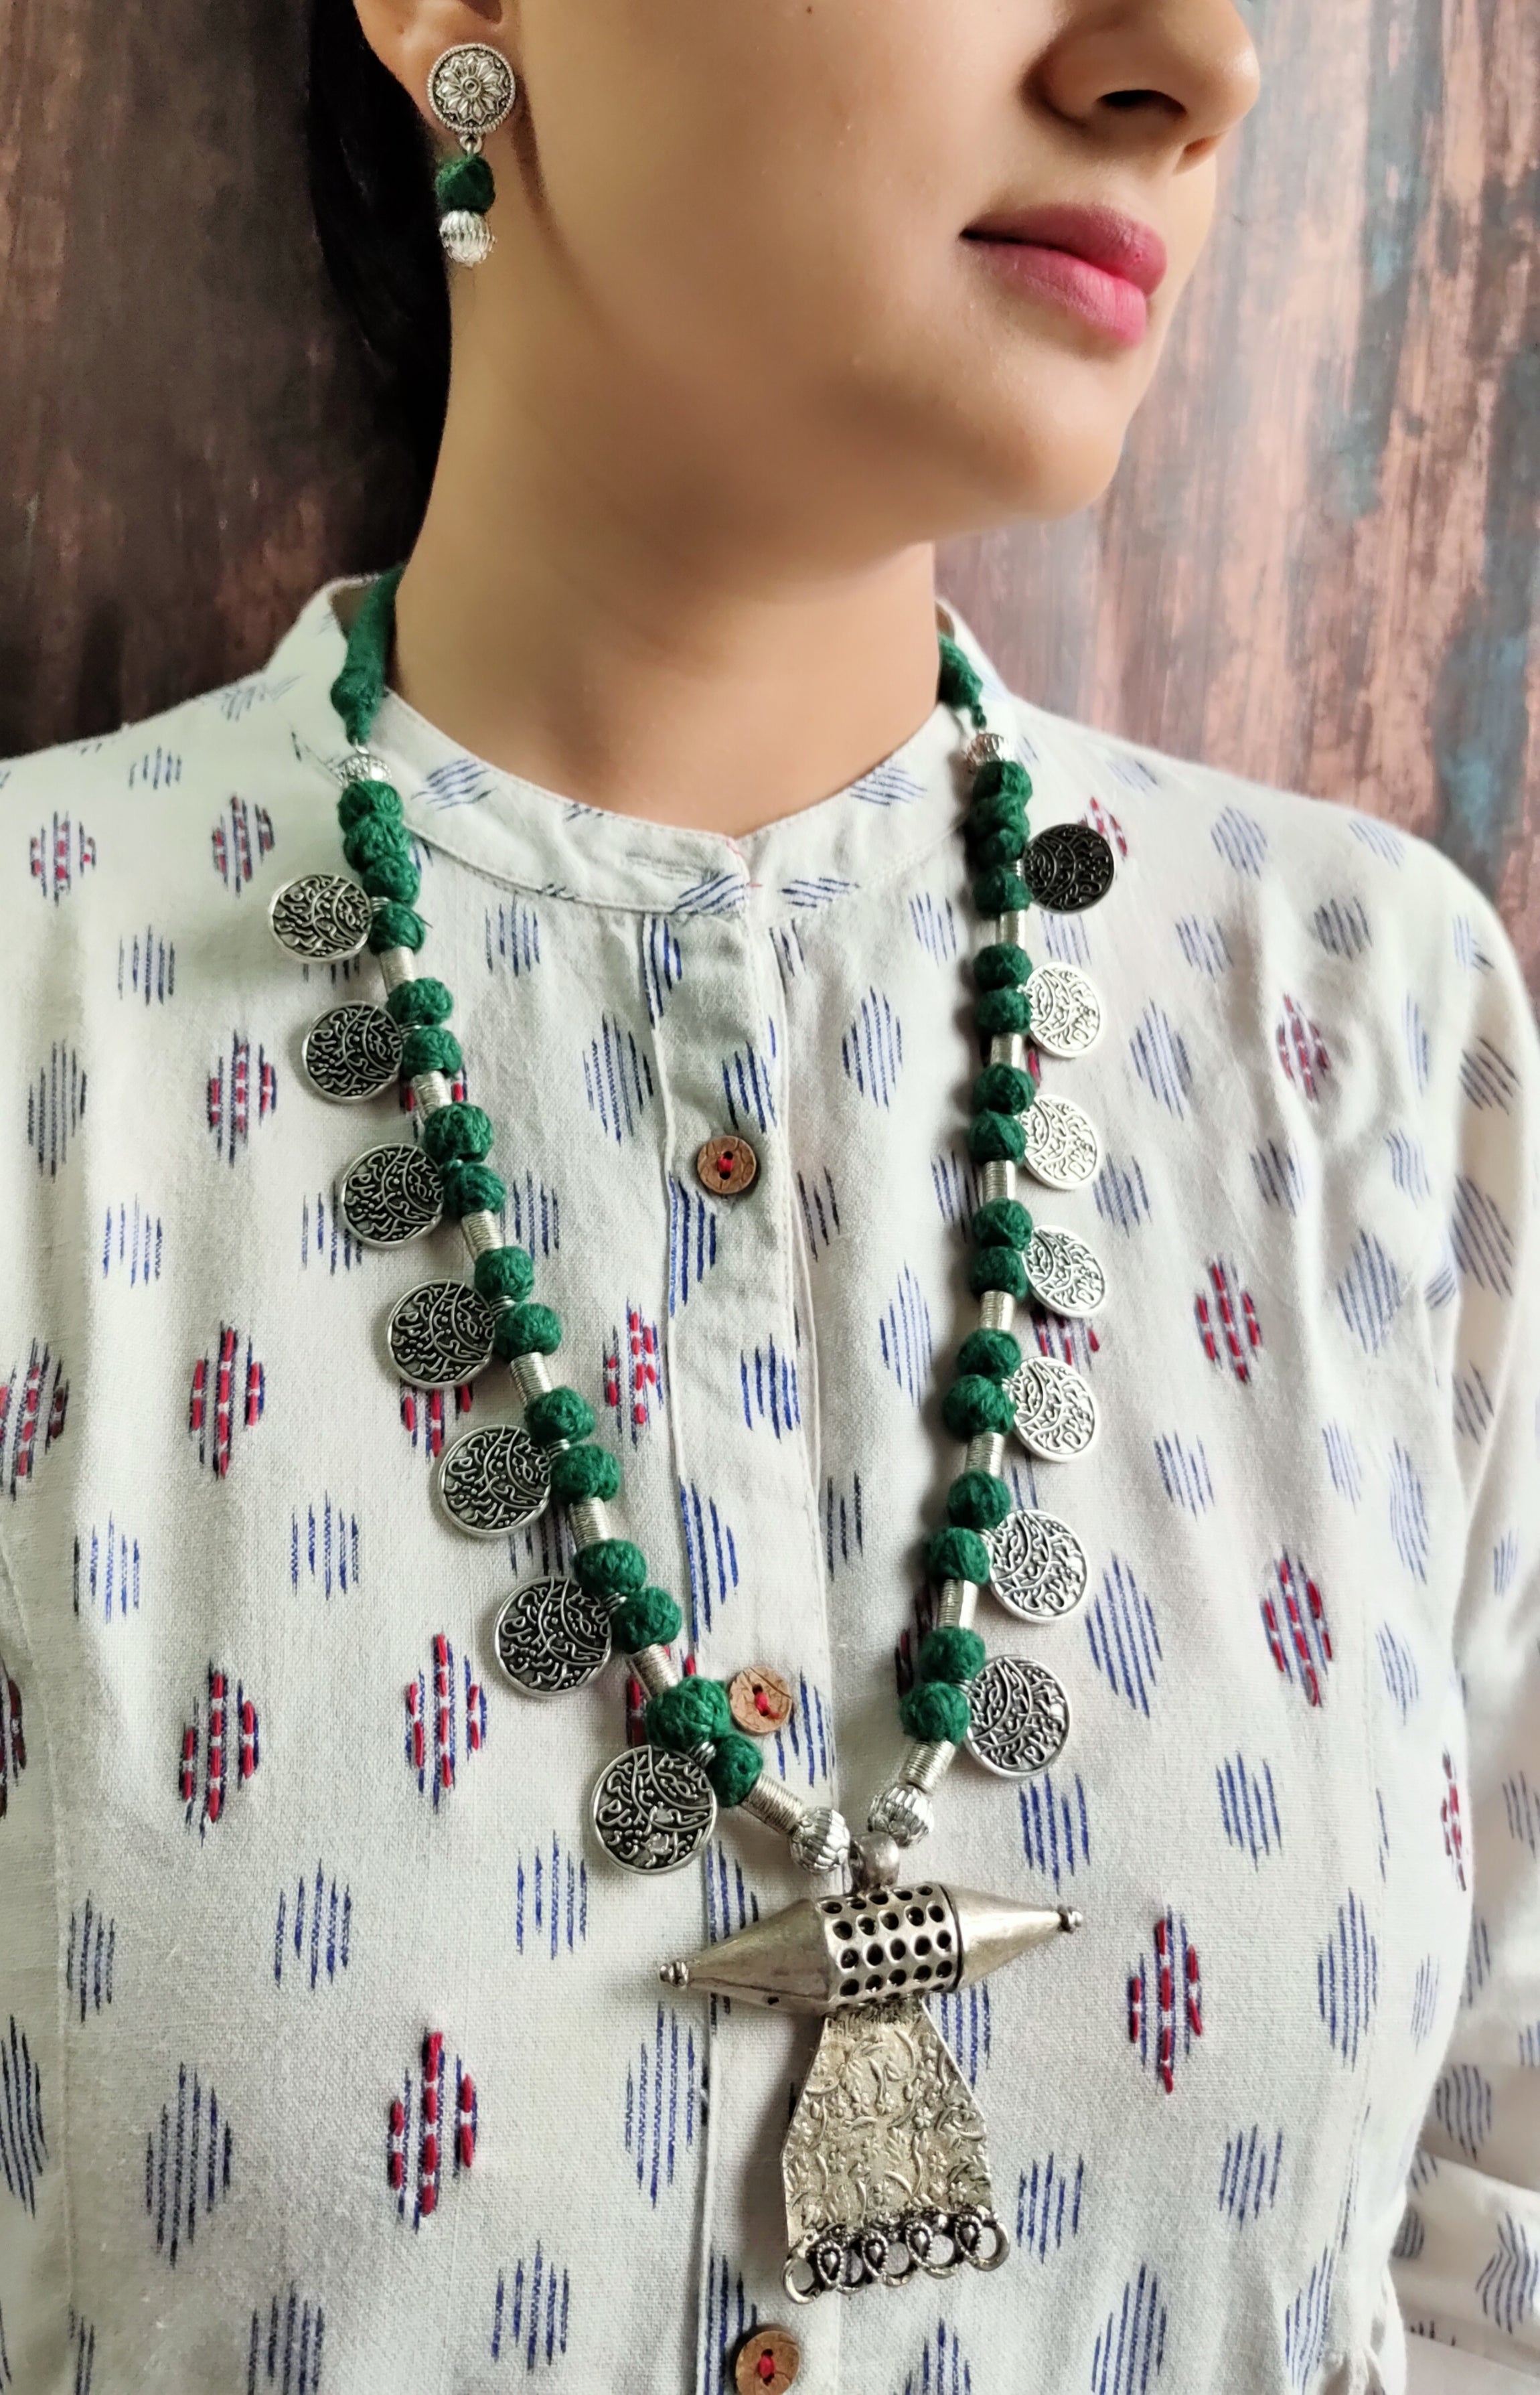 Fabric Beads and Coins Necklace Set with Warrior Metal Pendant